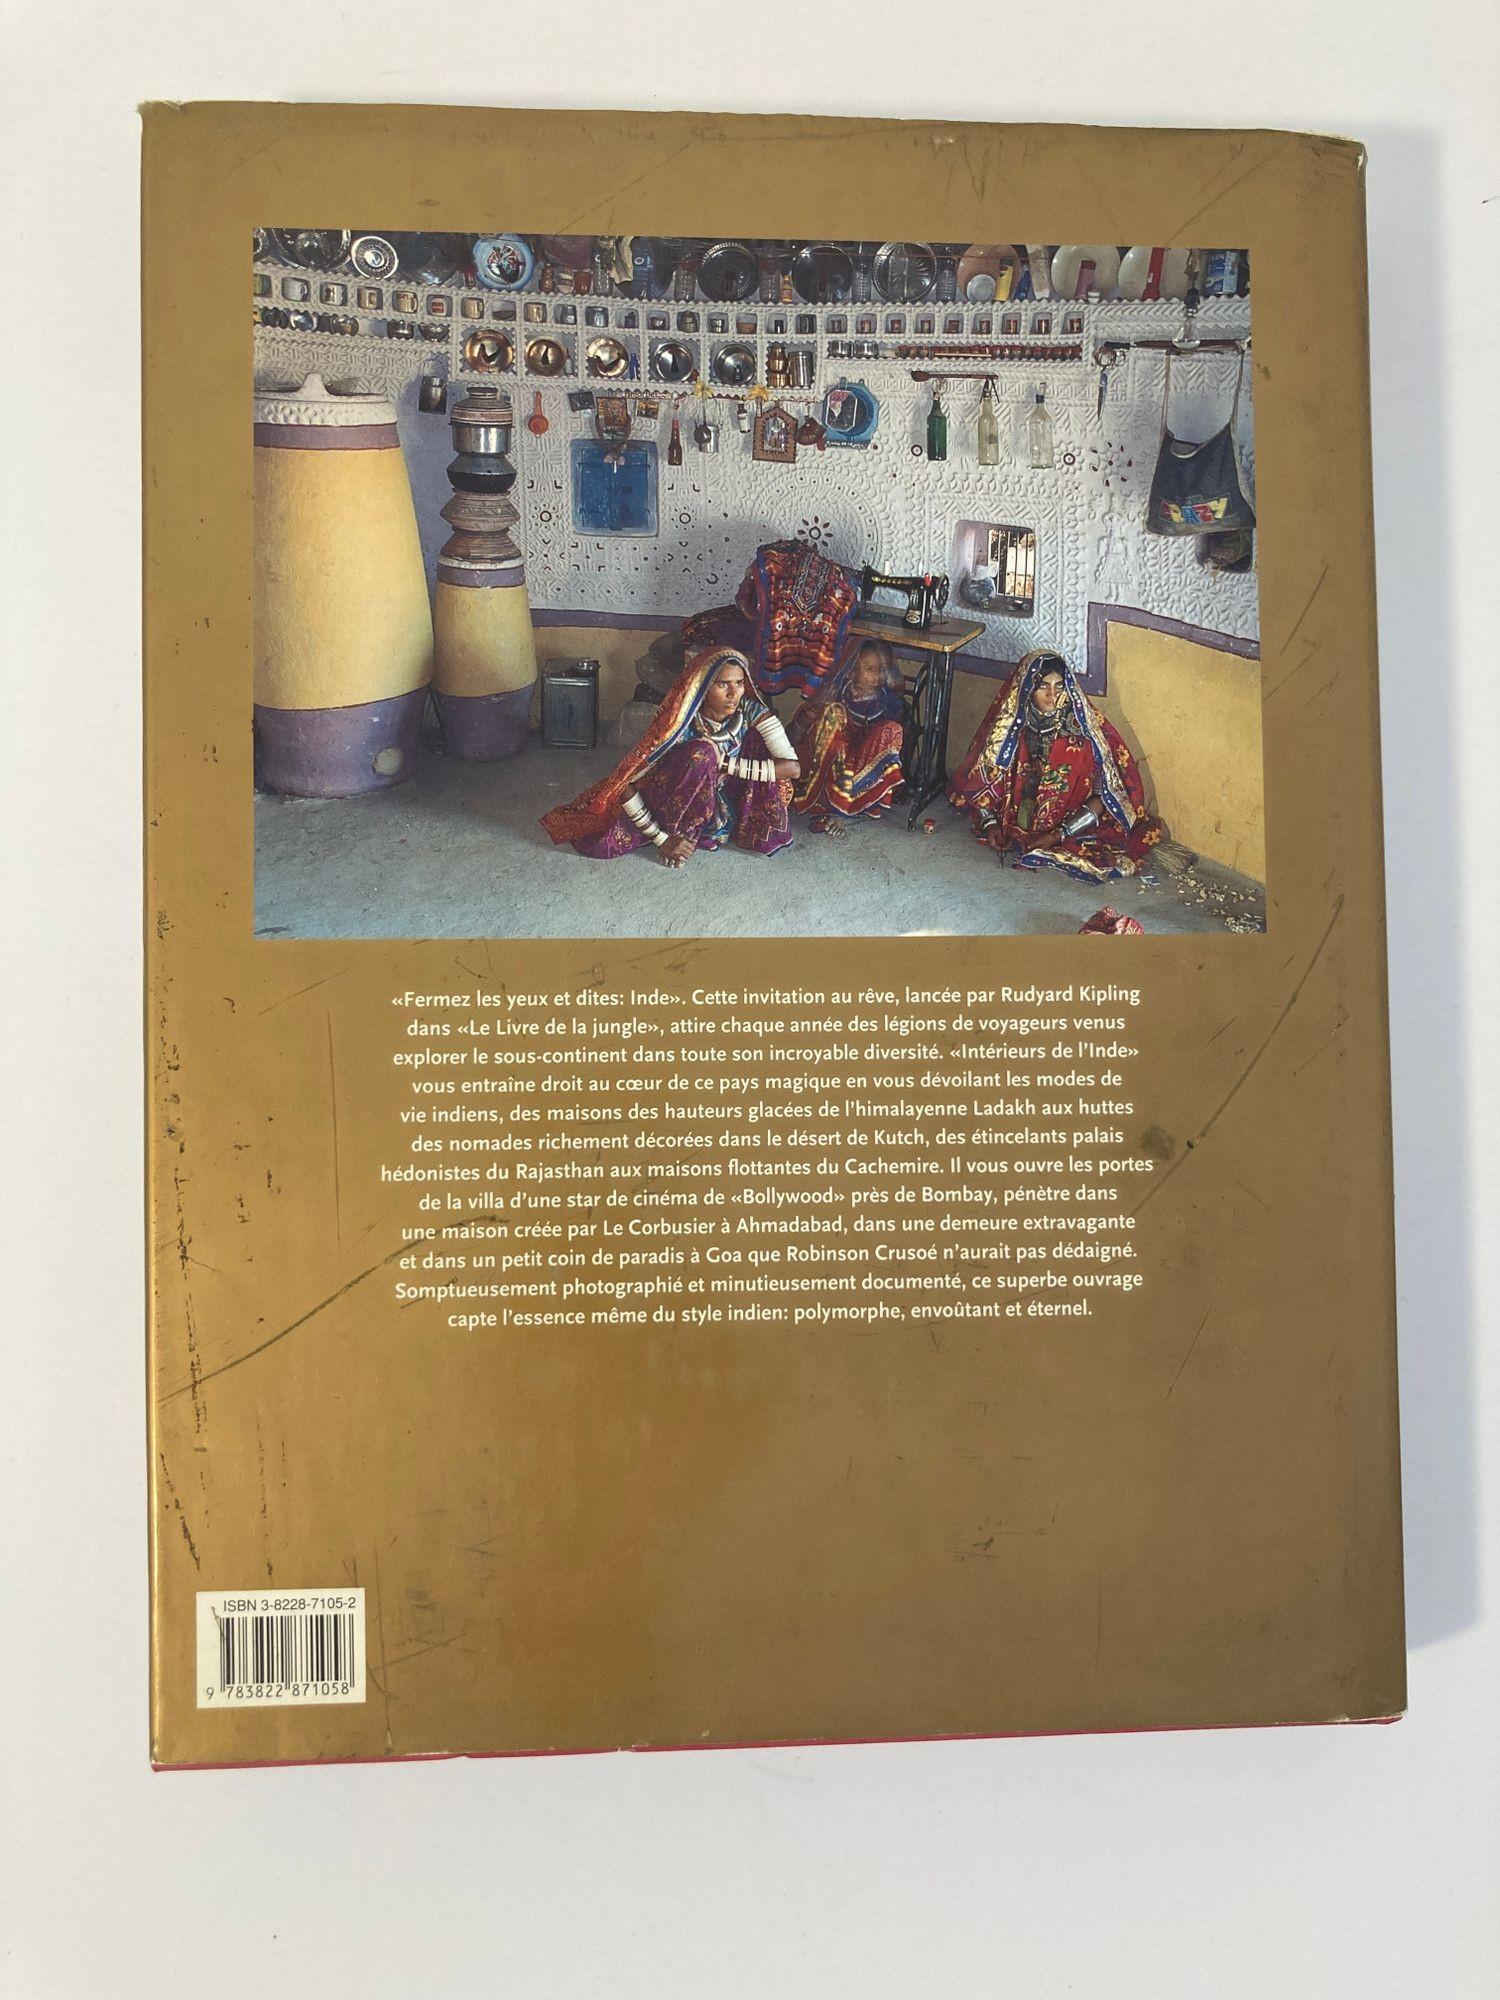 Indian Interiors Hardcover Book Taschen 1999 by Sunil Sethi In Fair Condition For Sale In North Hollywood, CA